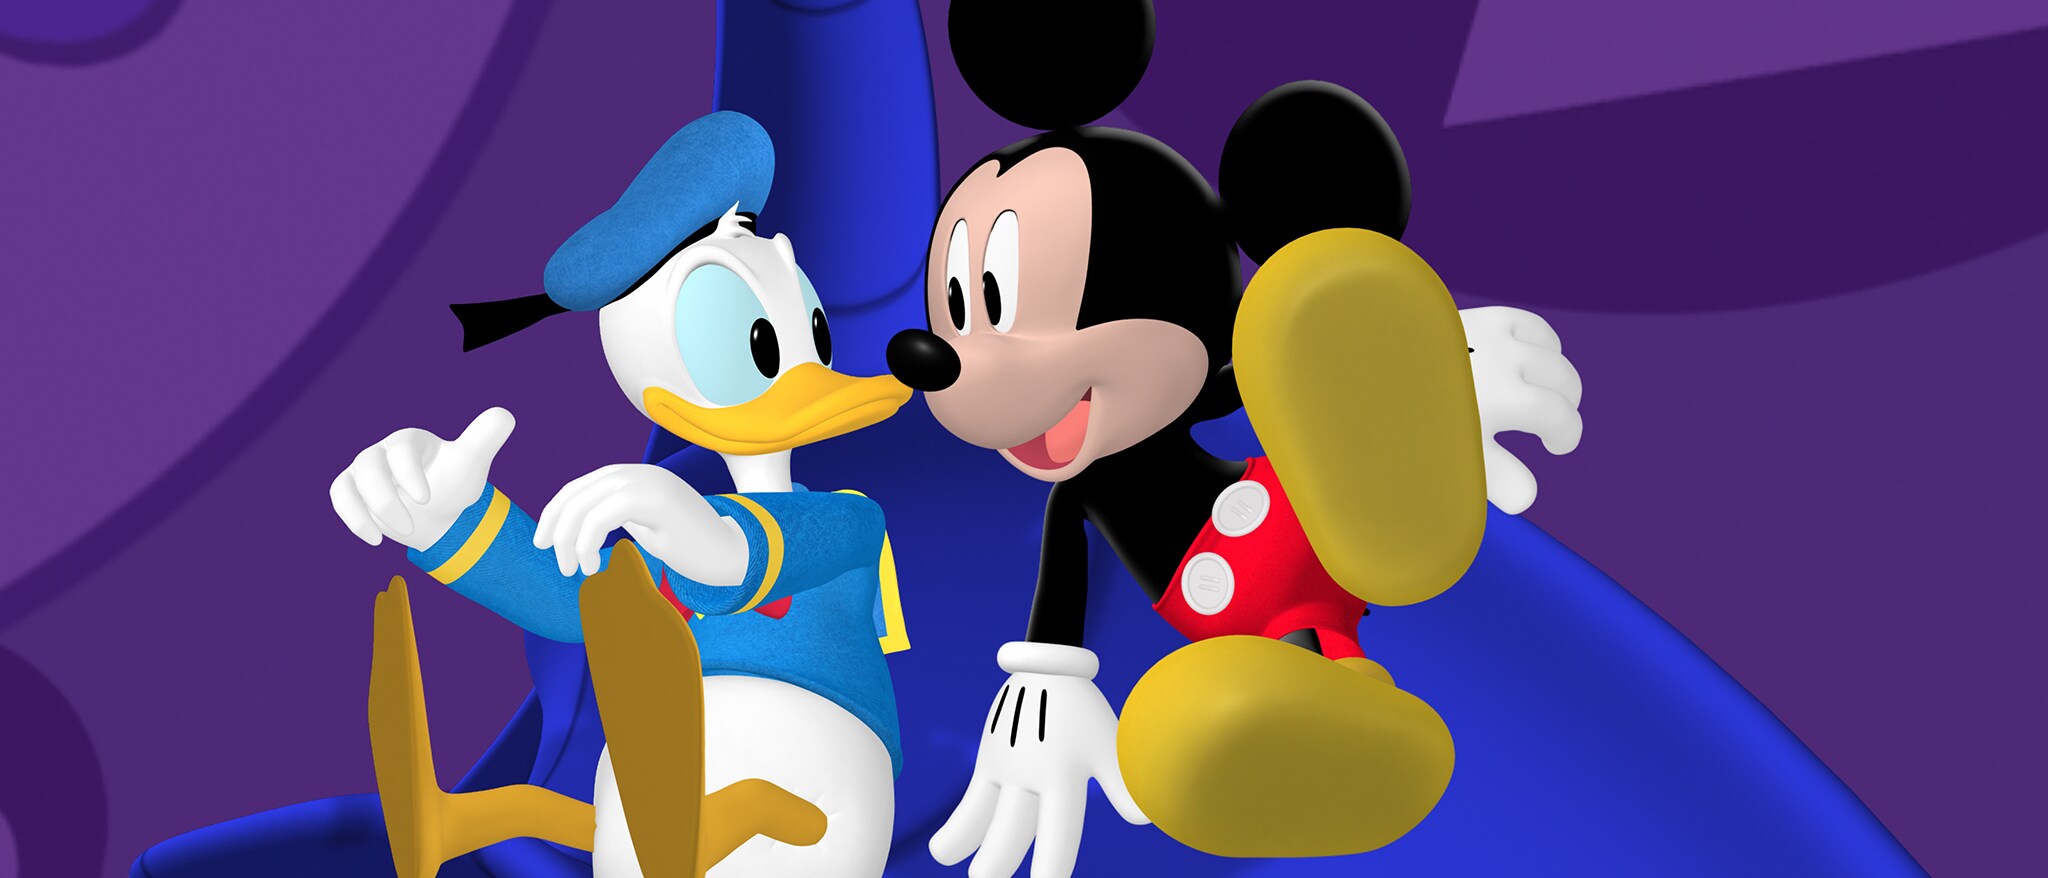 Mickey Mouse Clubhouse Mickey's Adventures In Wonderland 03 